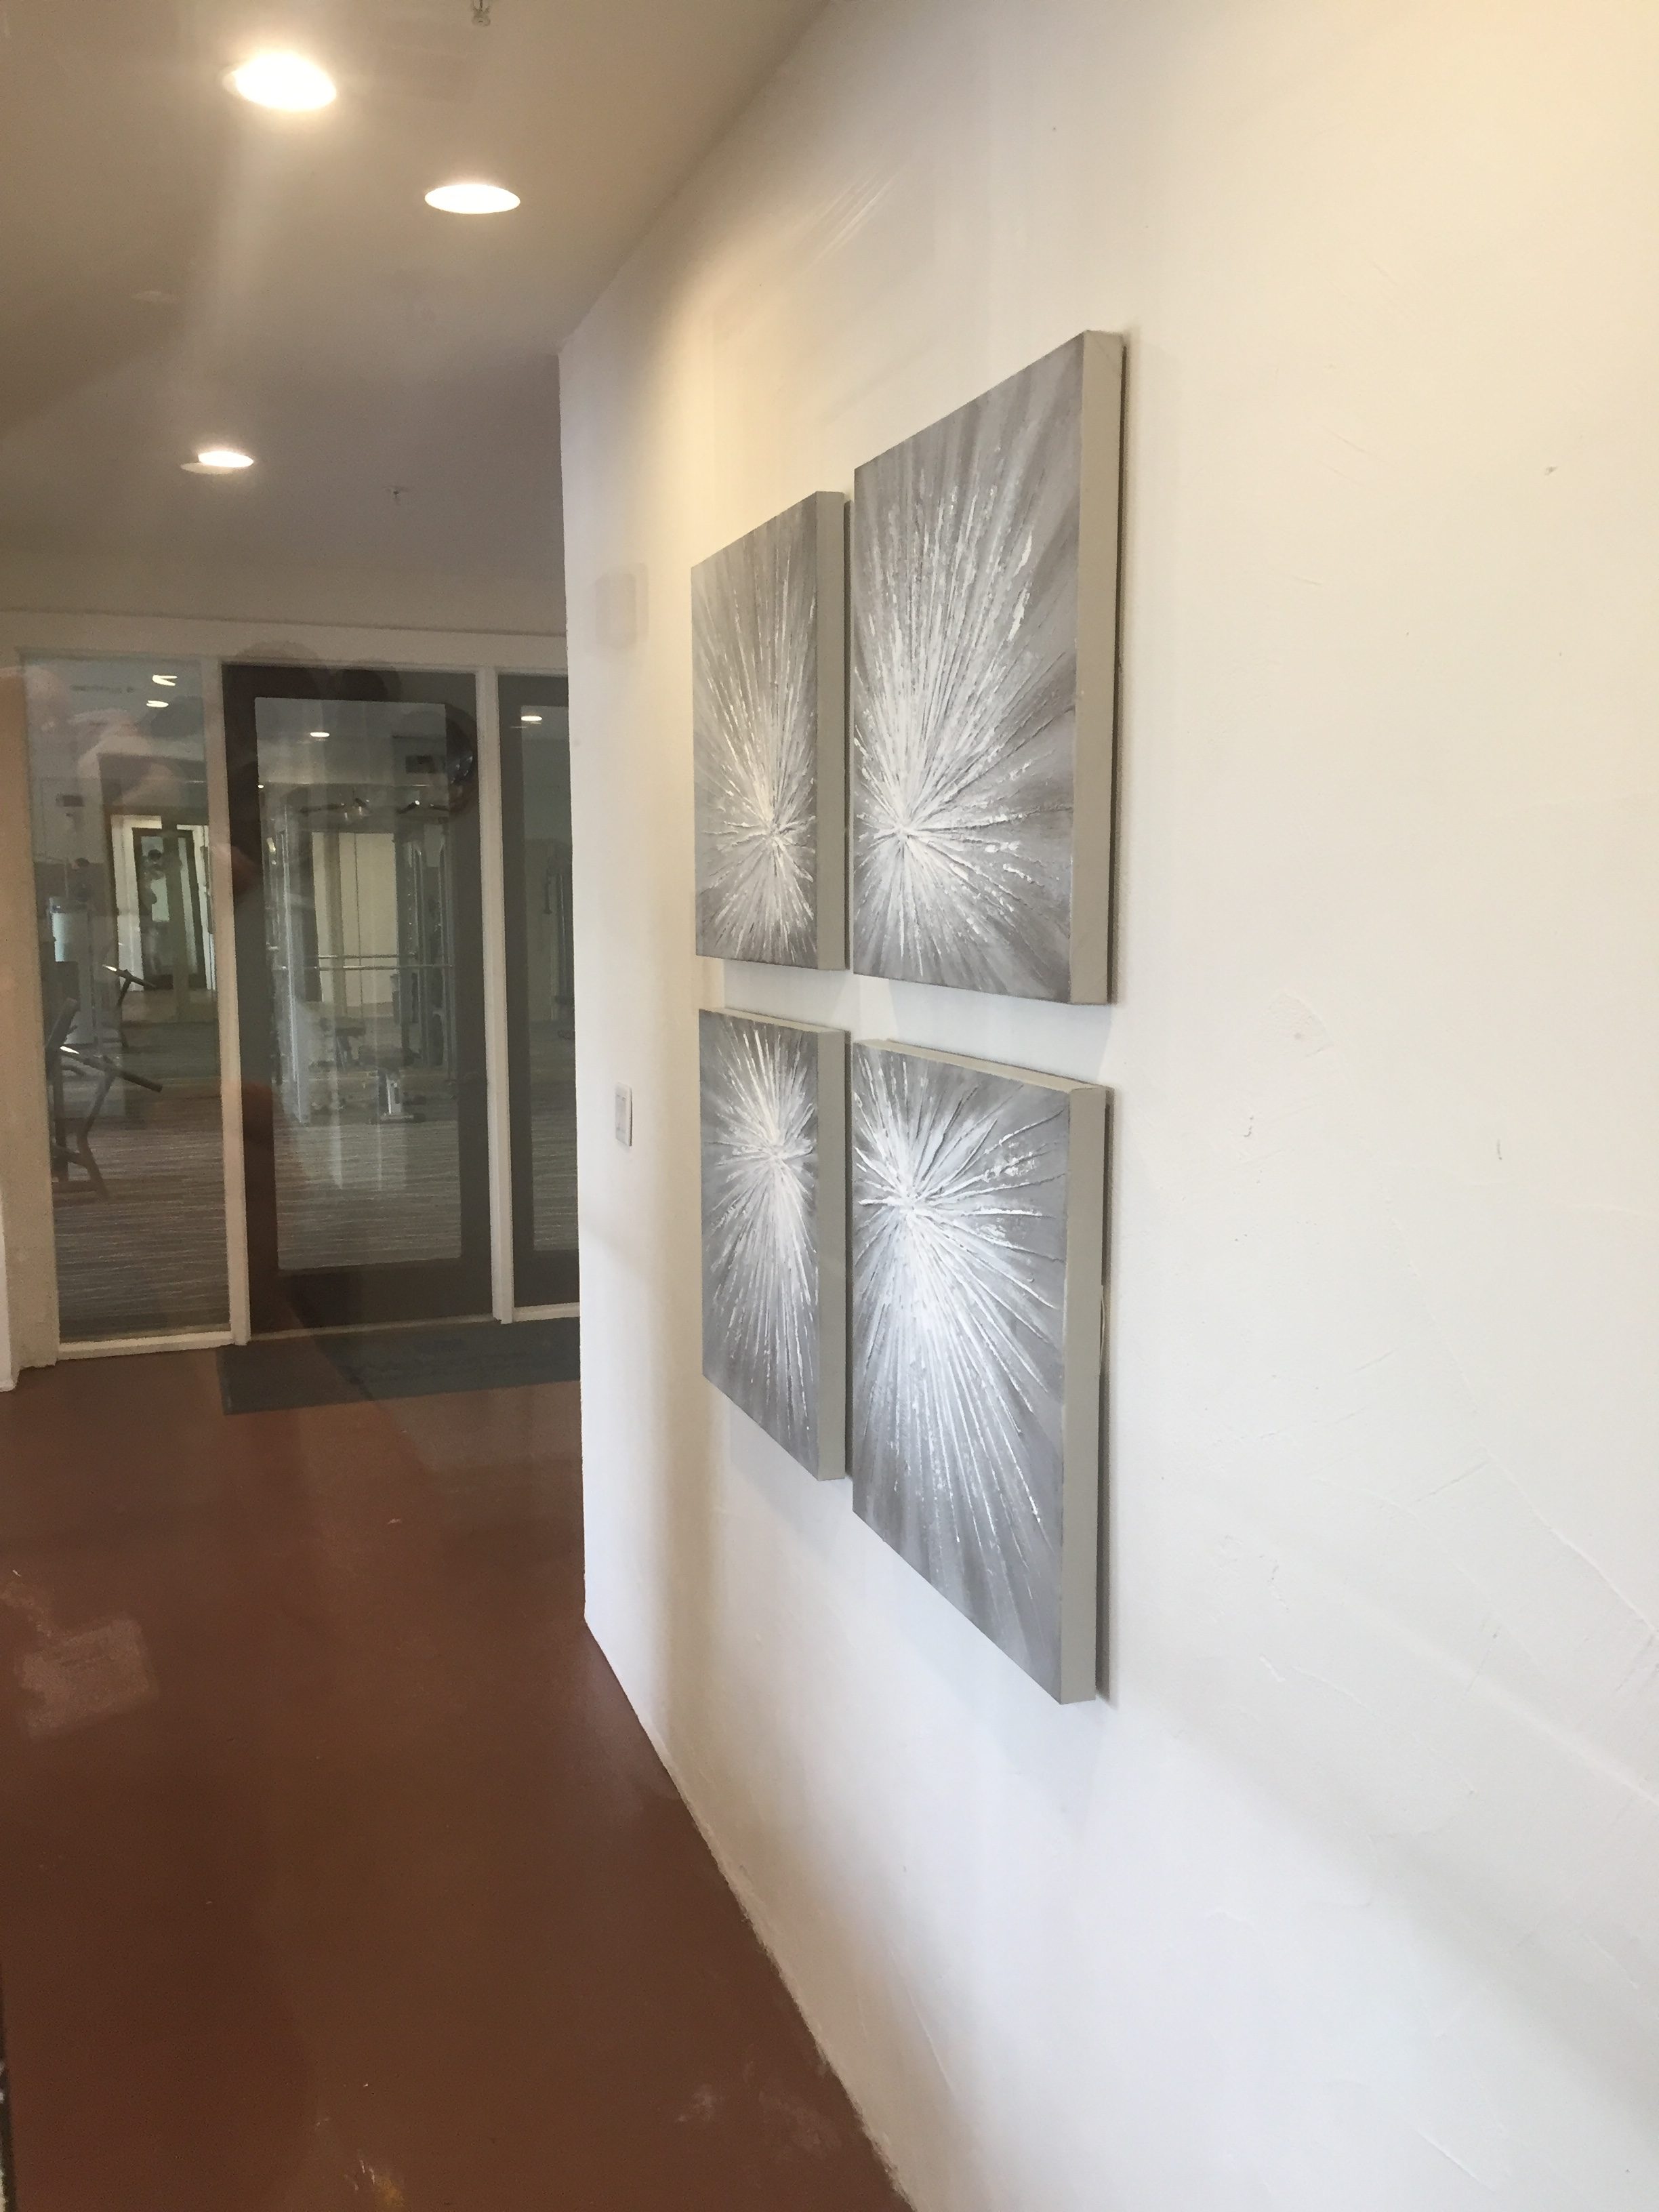 Paintings Installed with Security Hardware, Austin, Texas